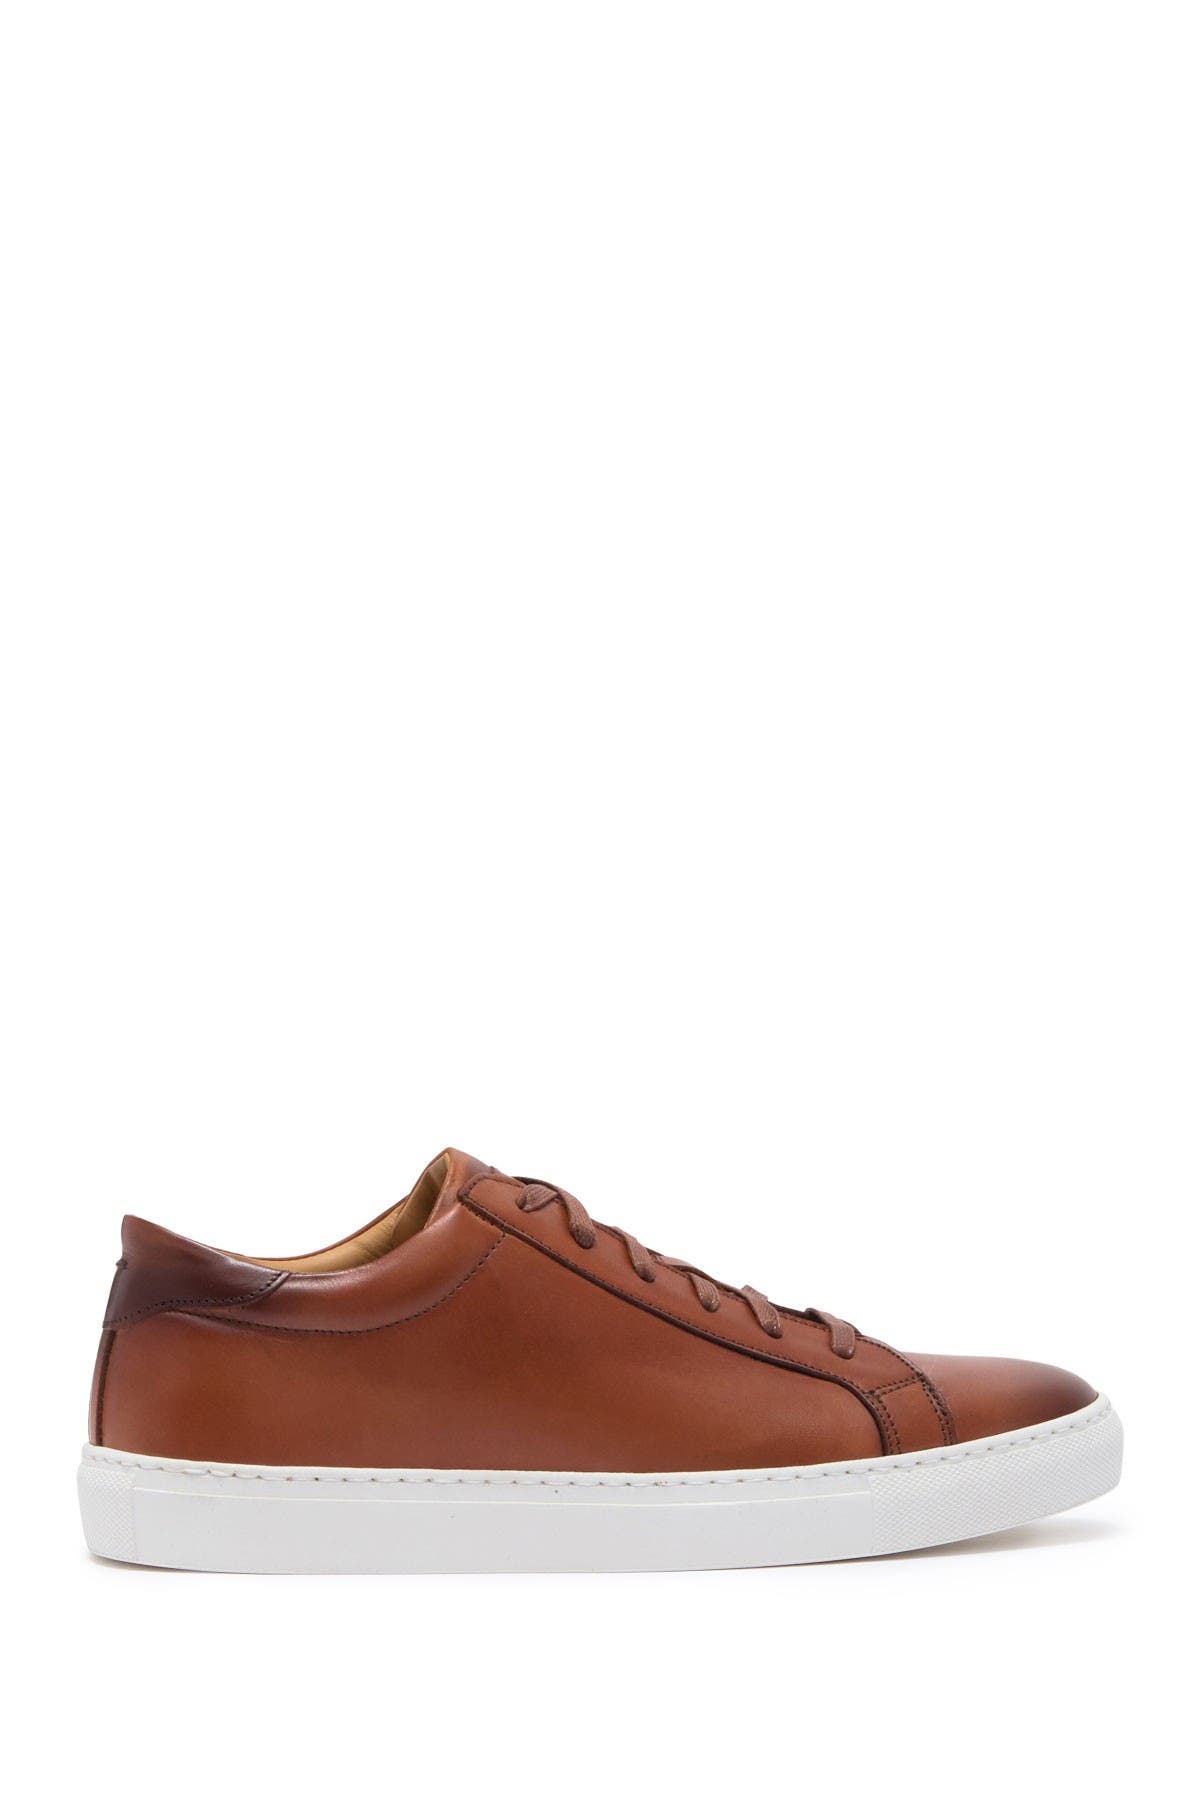 To Boot New York Devin Leather Sneaker In Rust/copper1